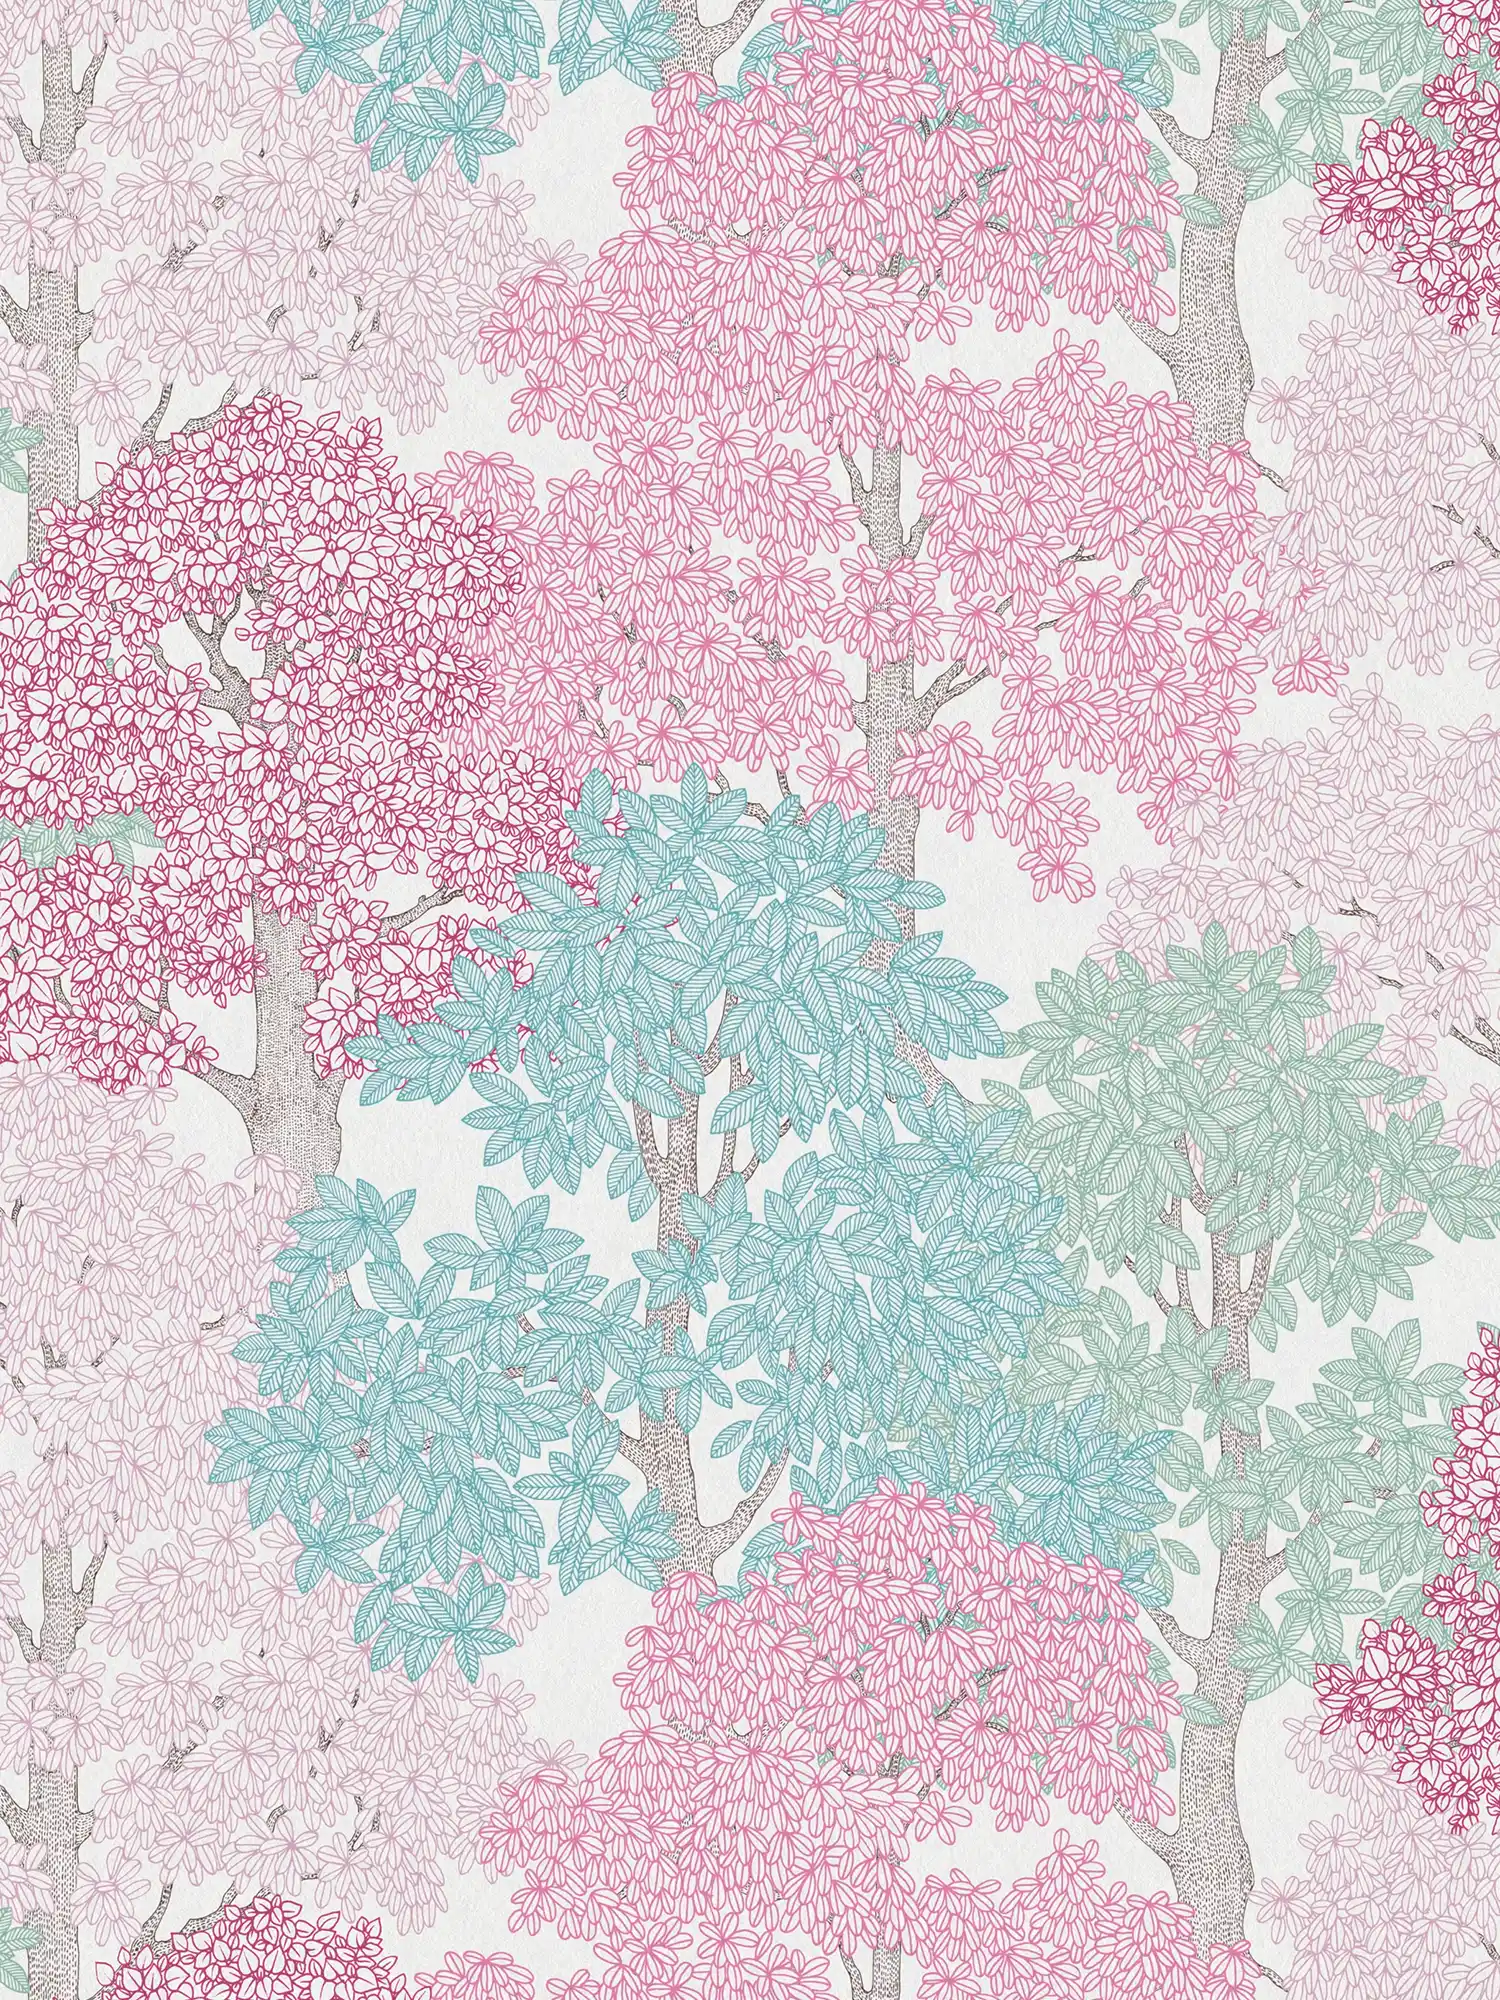 Wallpaper forest design in drawing style with treetops - pink, blue, white
